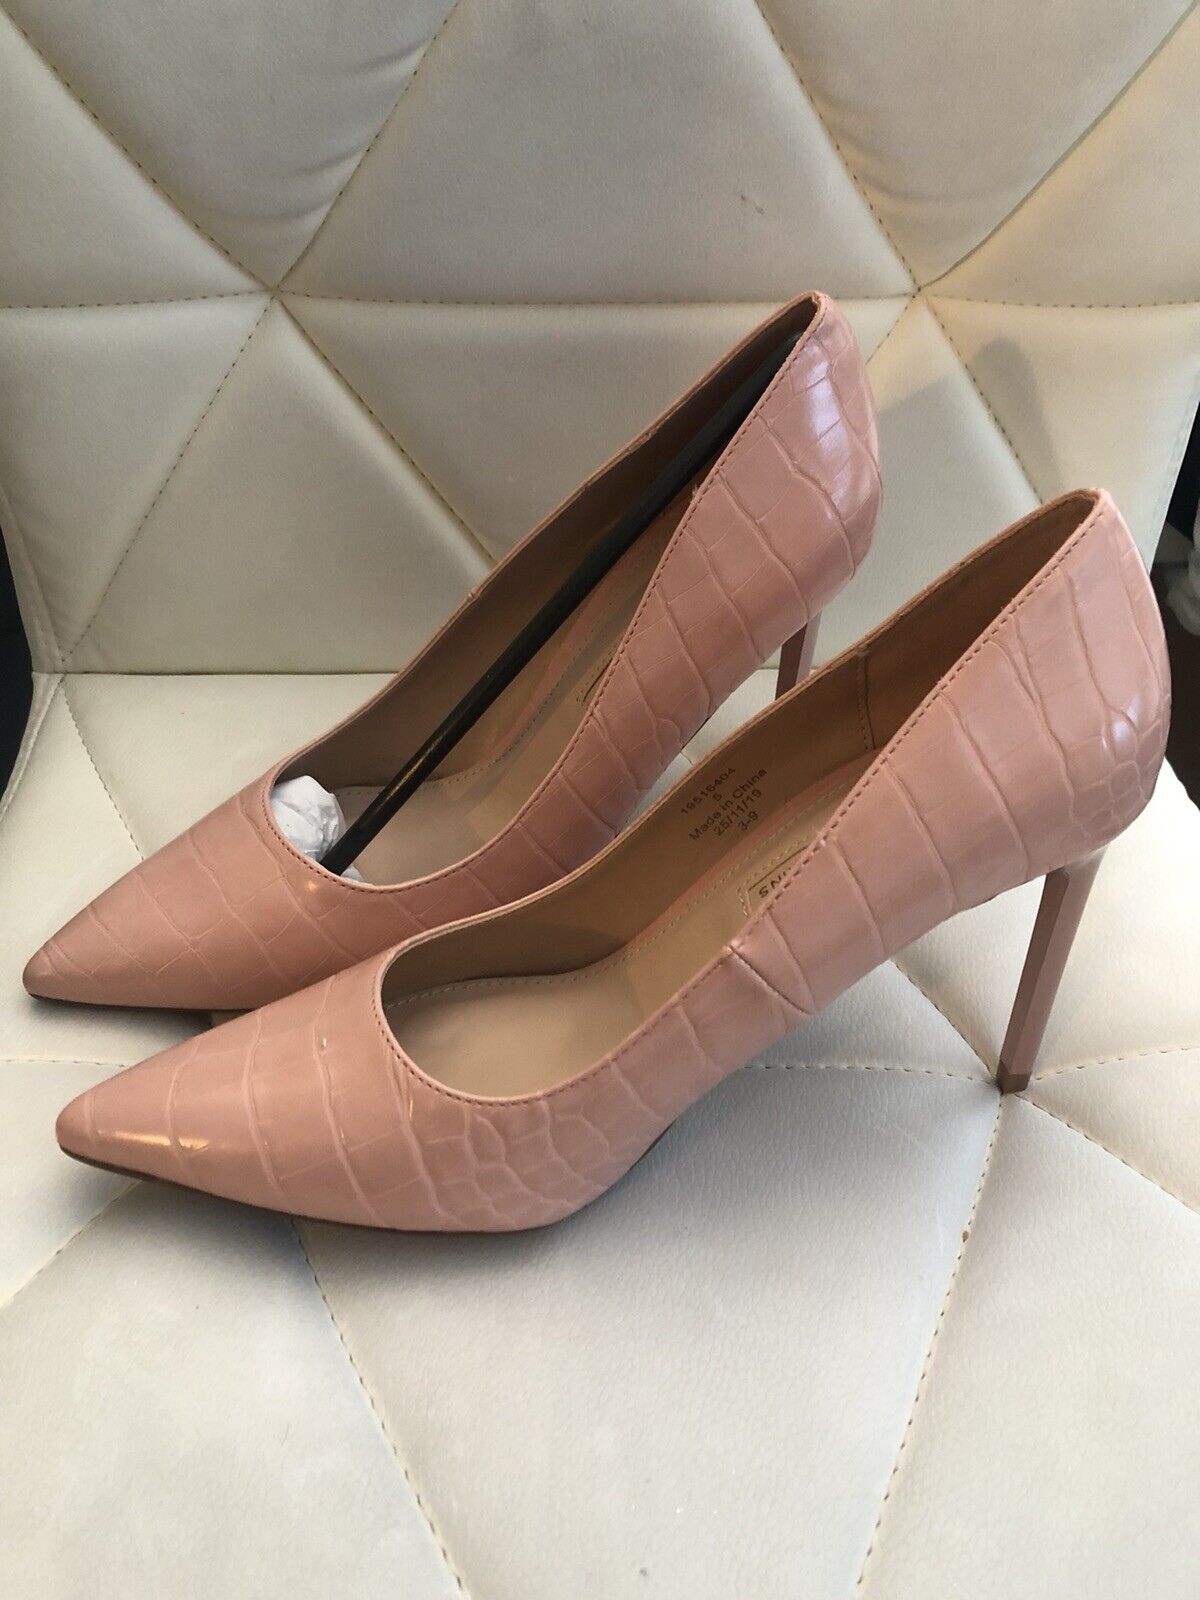 Ladies Size 5 Blush Ranking TOP6 Pink Shoes. NEW Excellent